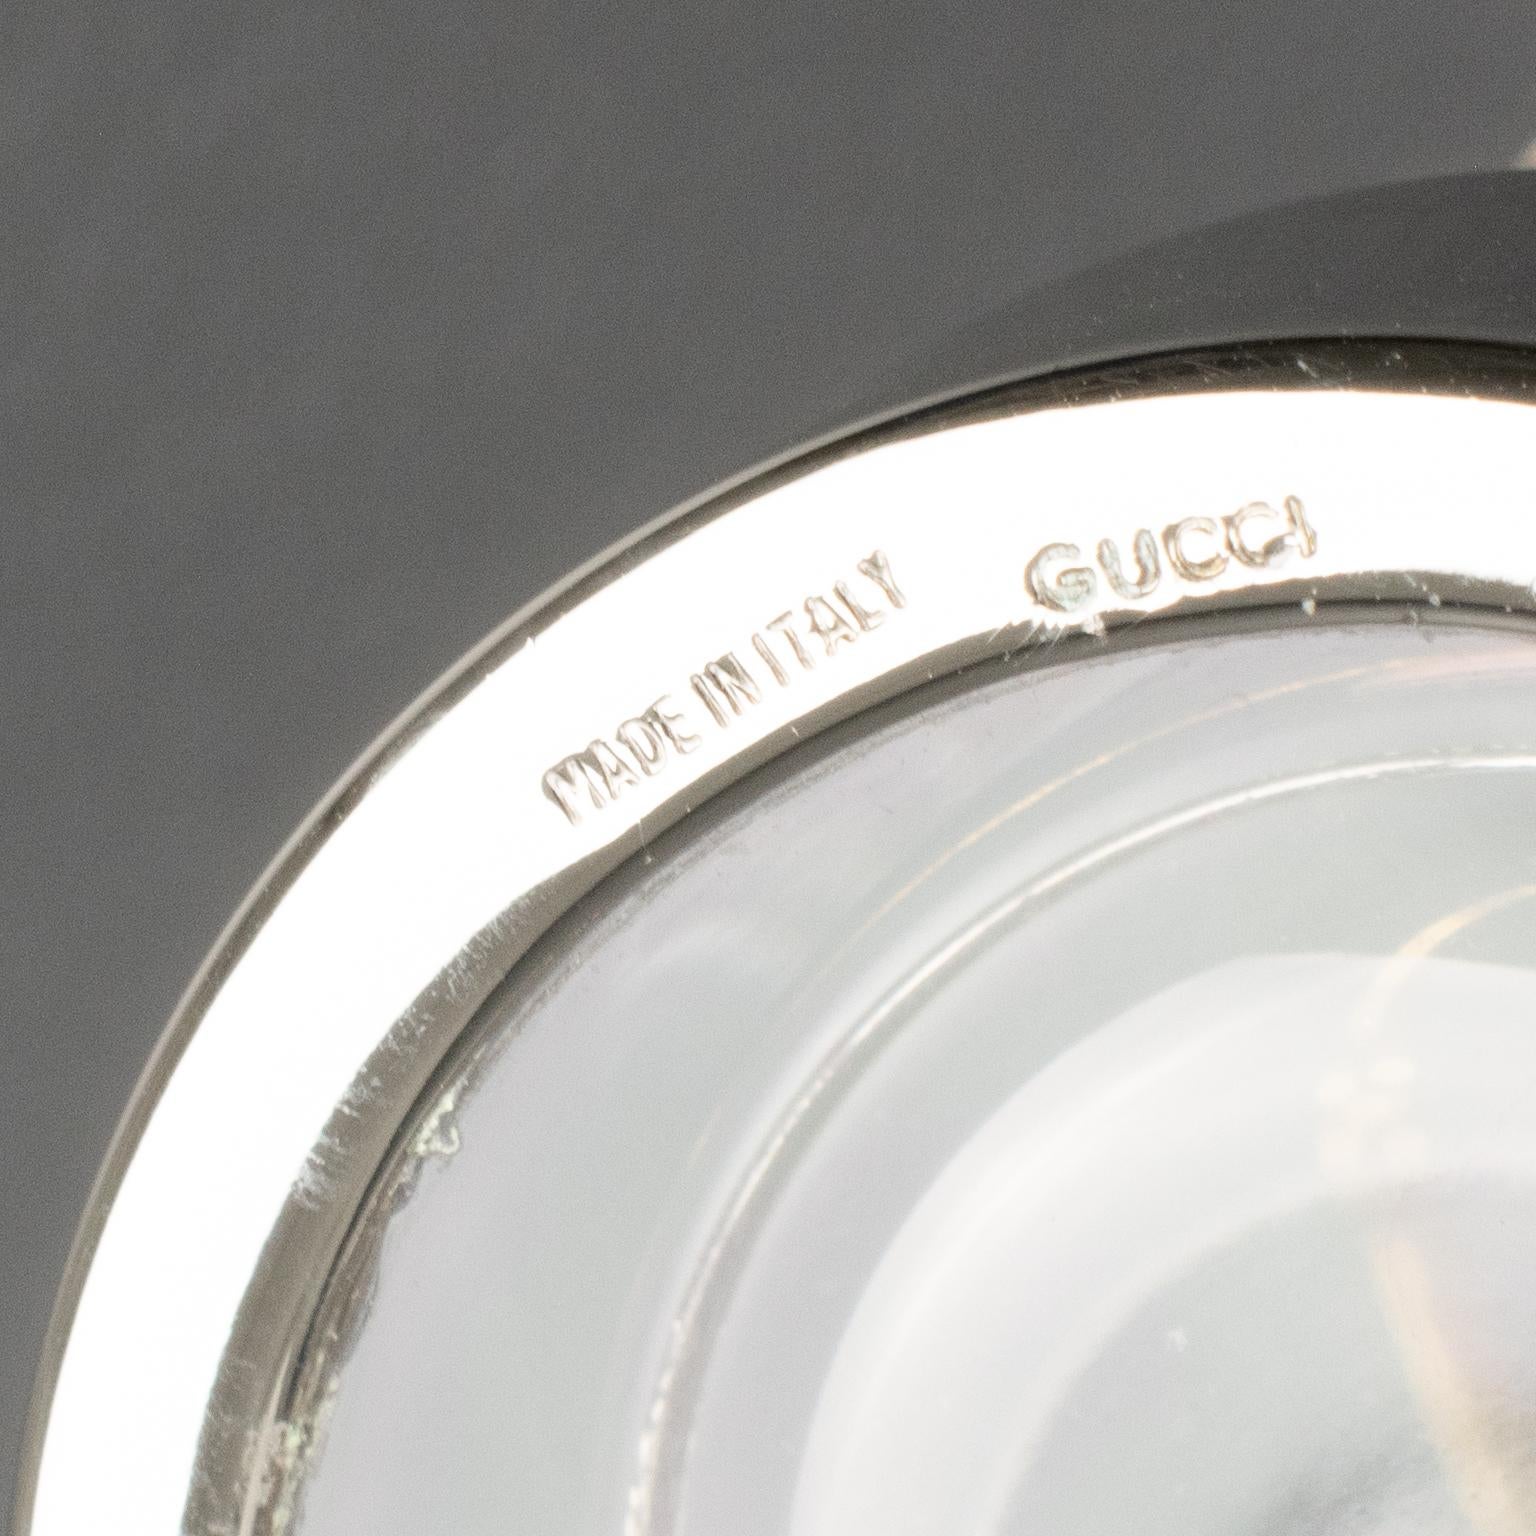 Gucci Italy Barware Set Silver Plate and Crystal HighBall Tumbler Glasses, 5 pc For Sale 8